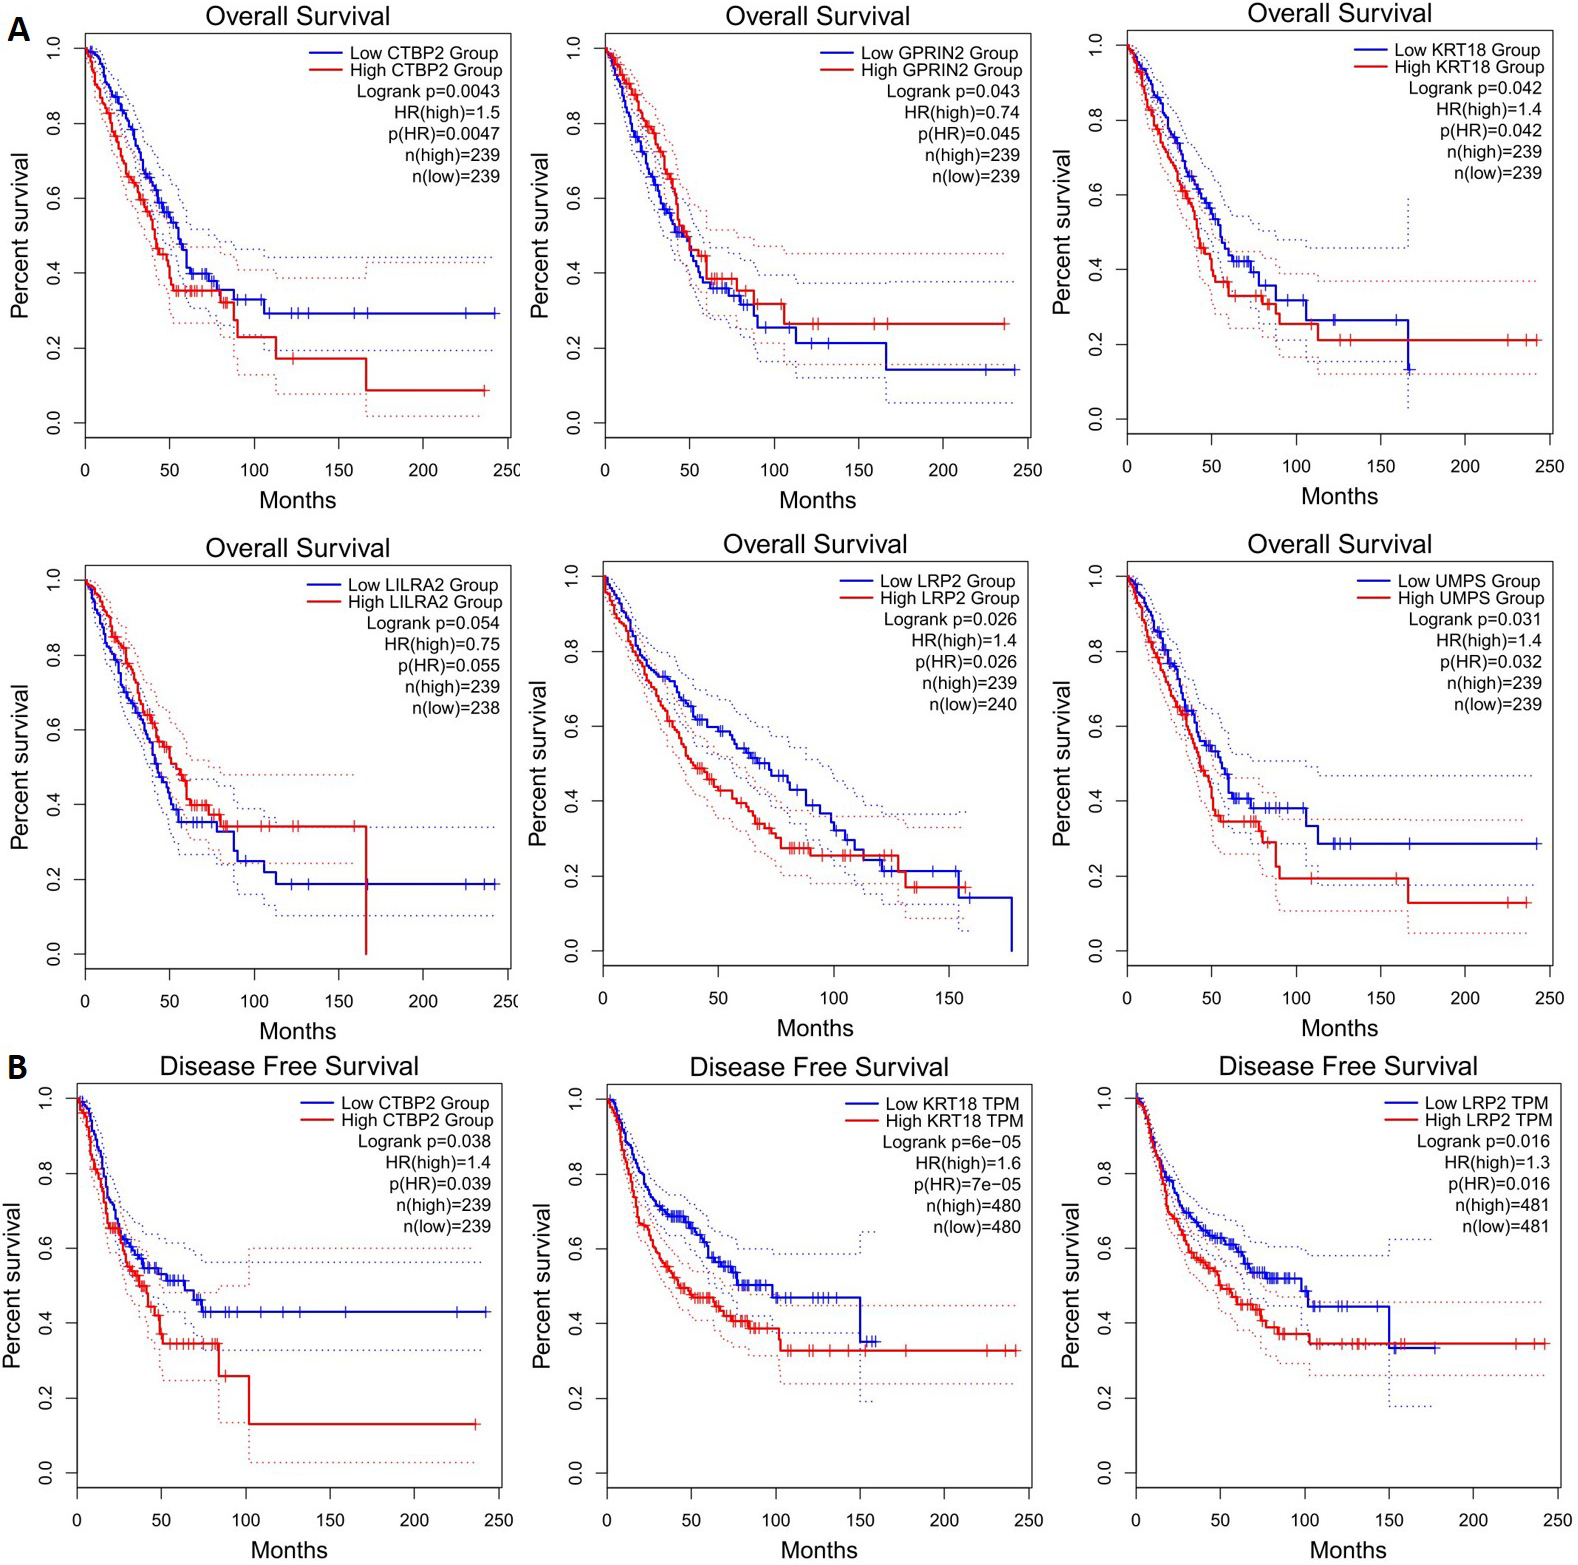 Prognostic roles of potential key genes in the NSCLC patients. Survival curves are plotted for NSCLC cancer patients. (A) Overall survival: CTBP2, GPRIN2, KRT18, LILRA2, LRP2, UPMS; (B) Disease free survival: CTBP2, KRT18, LRP2.